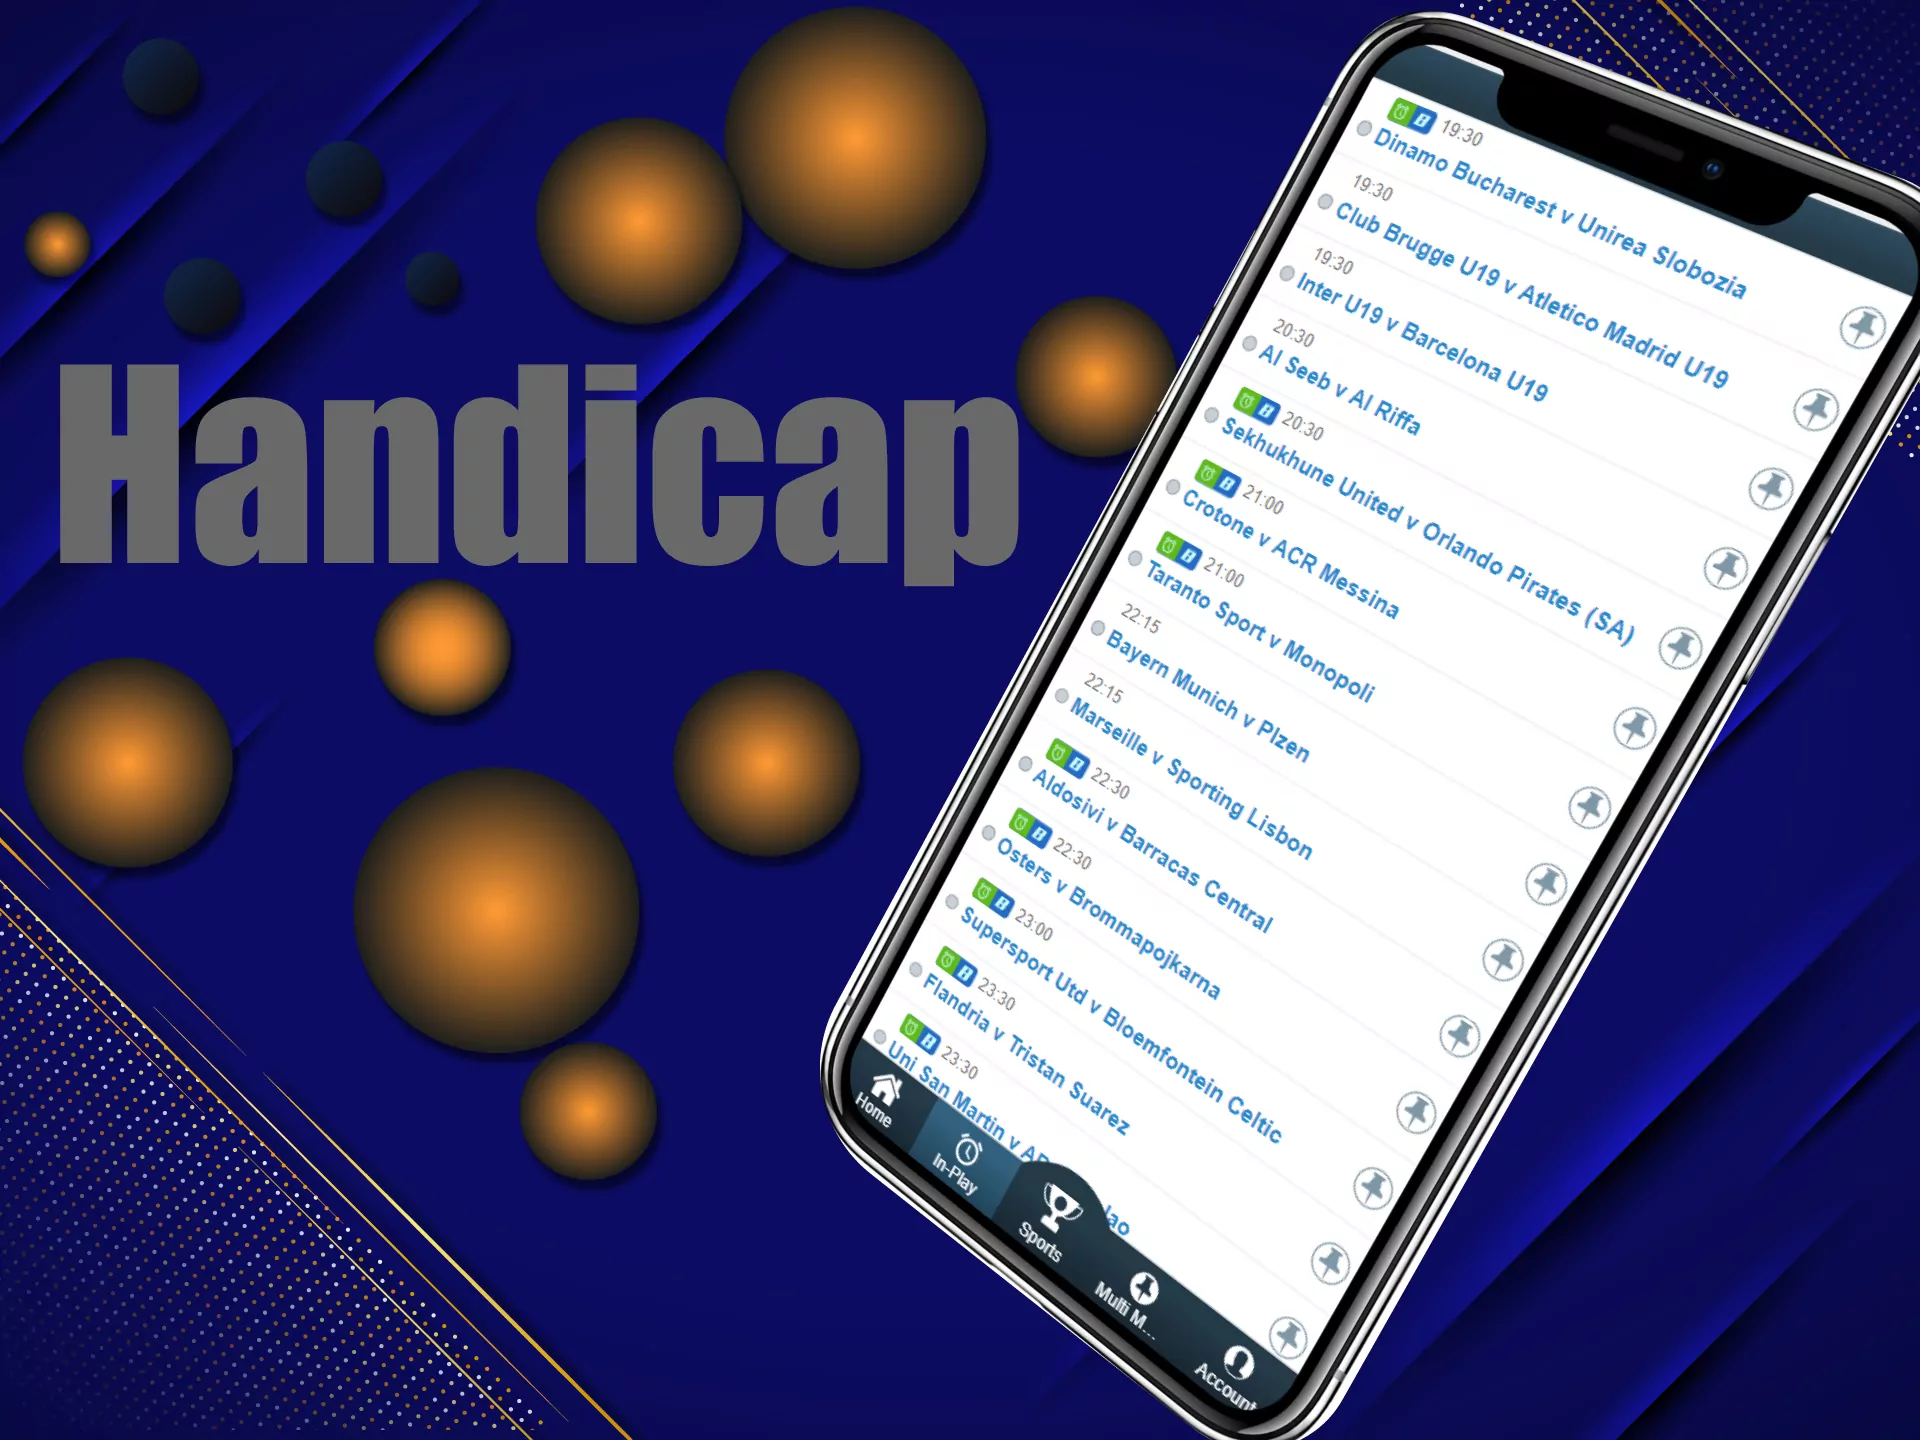 If you are an experienced bettor you can easily place handicap bets in the ICCWIN mobile application.